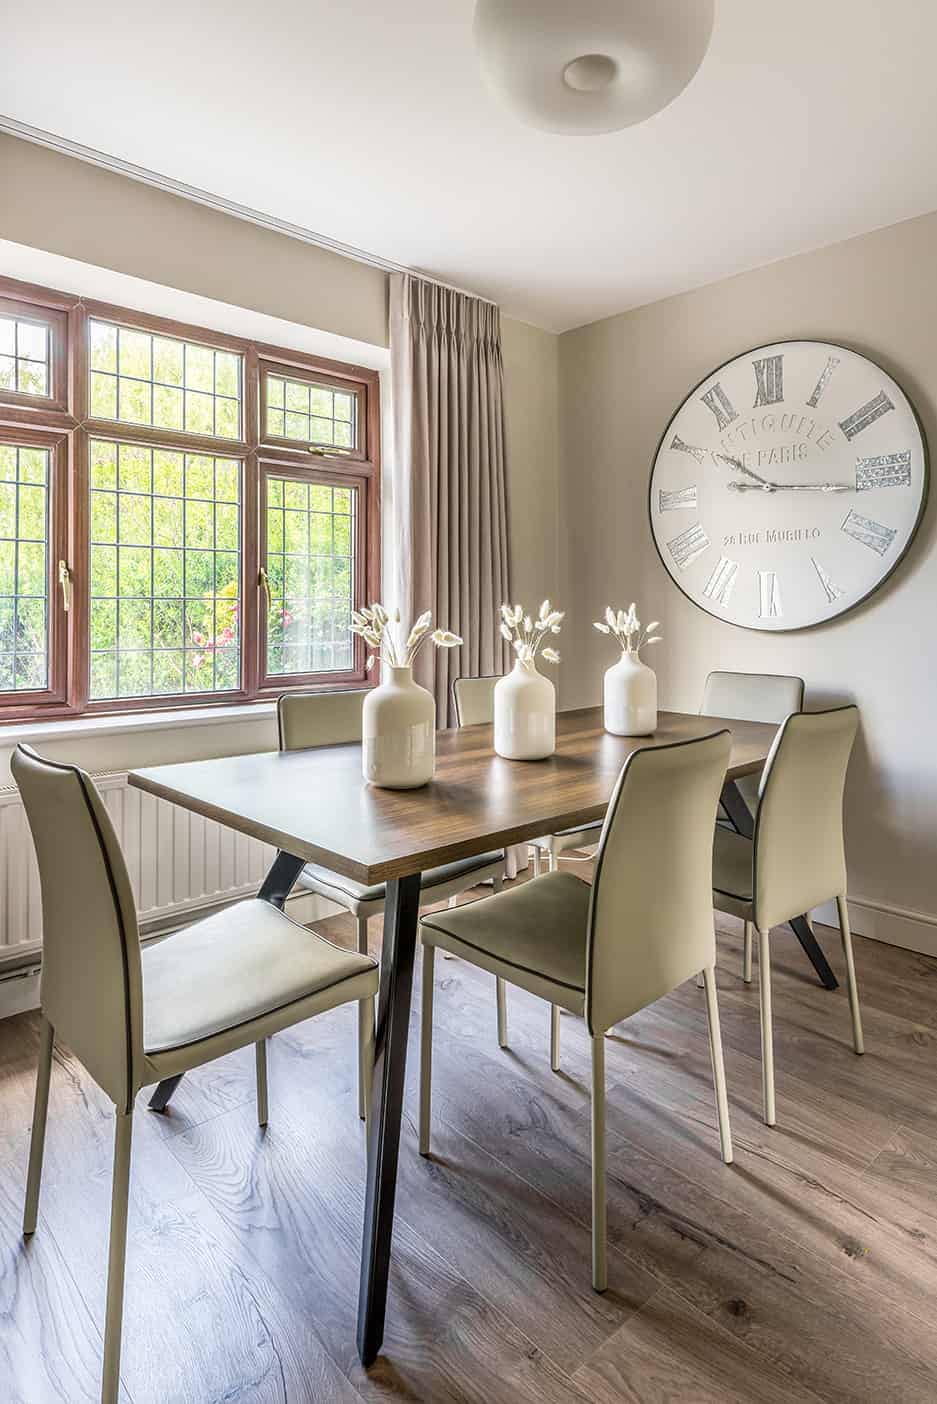 Loughton Interior Design for a Dining Table